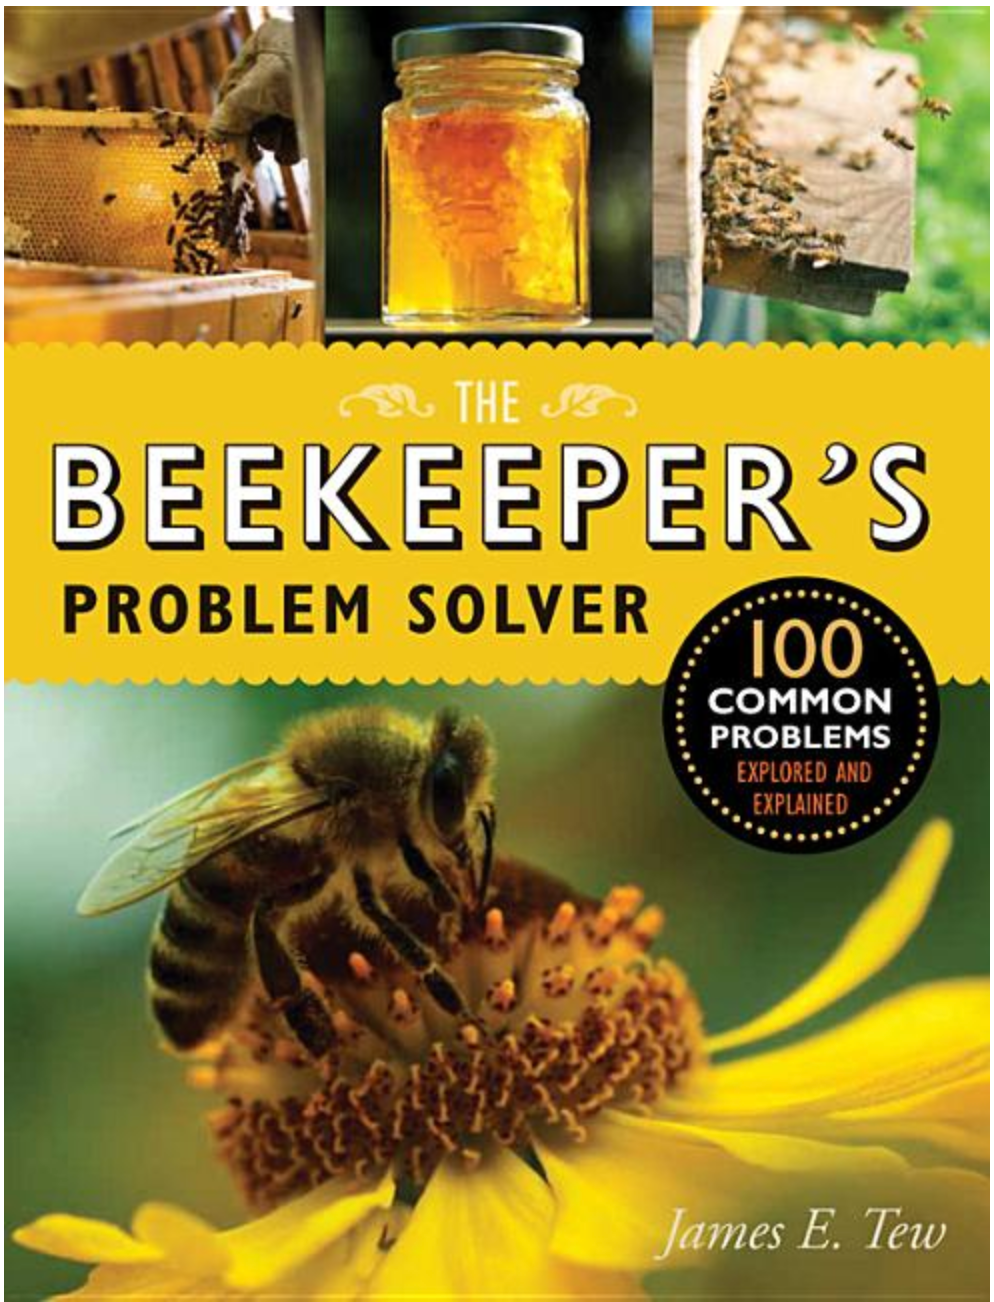 The Beekeepers Problem Solver by James E. Tew